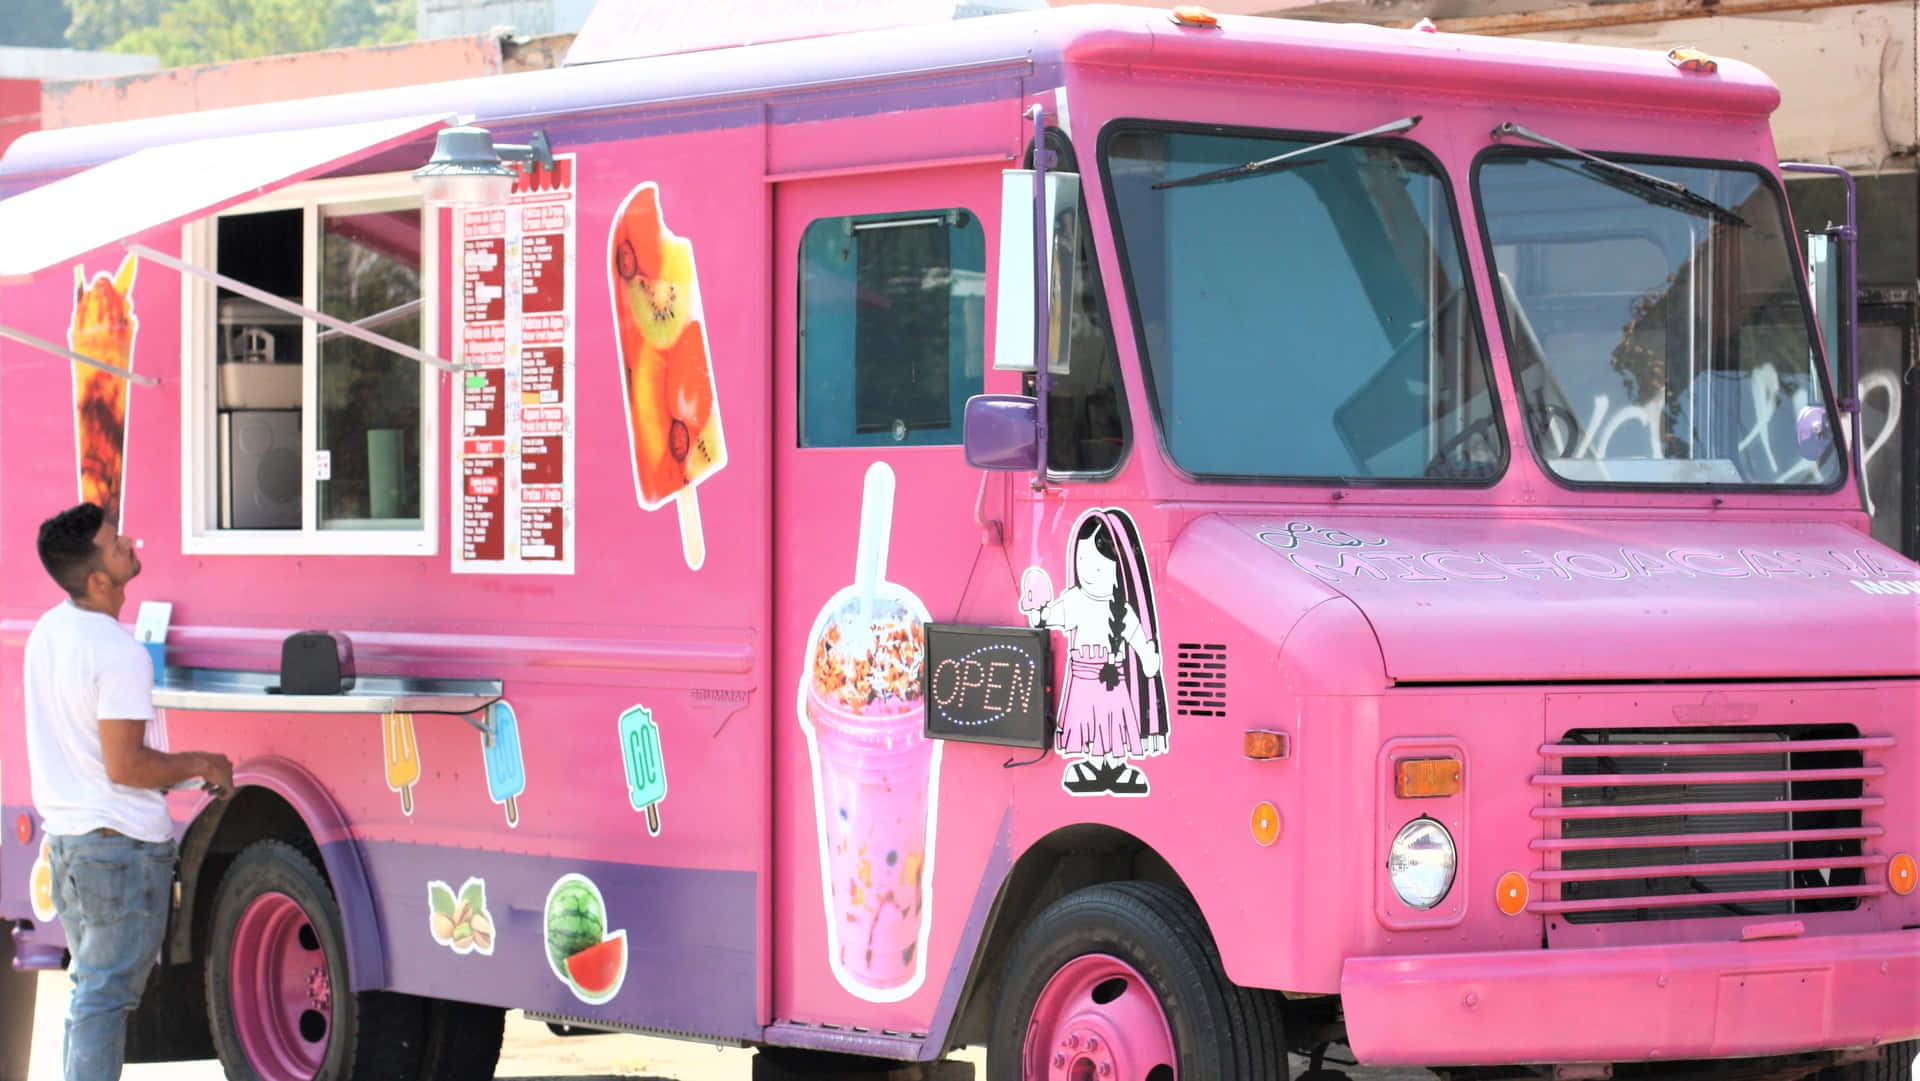 Celebrate Summer With A Sweet Treat From An Ice Cream Truck